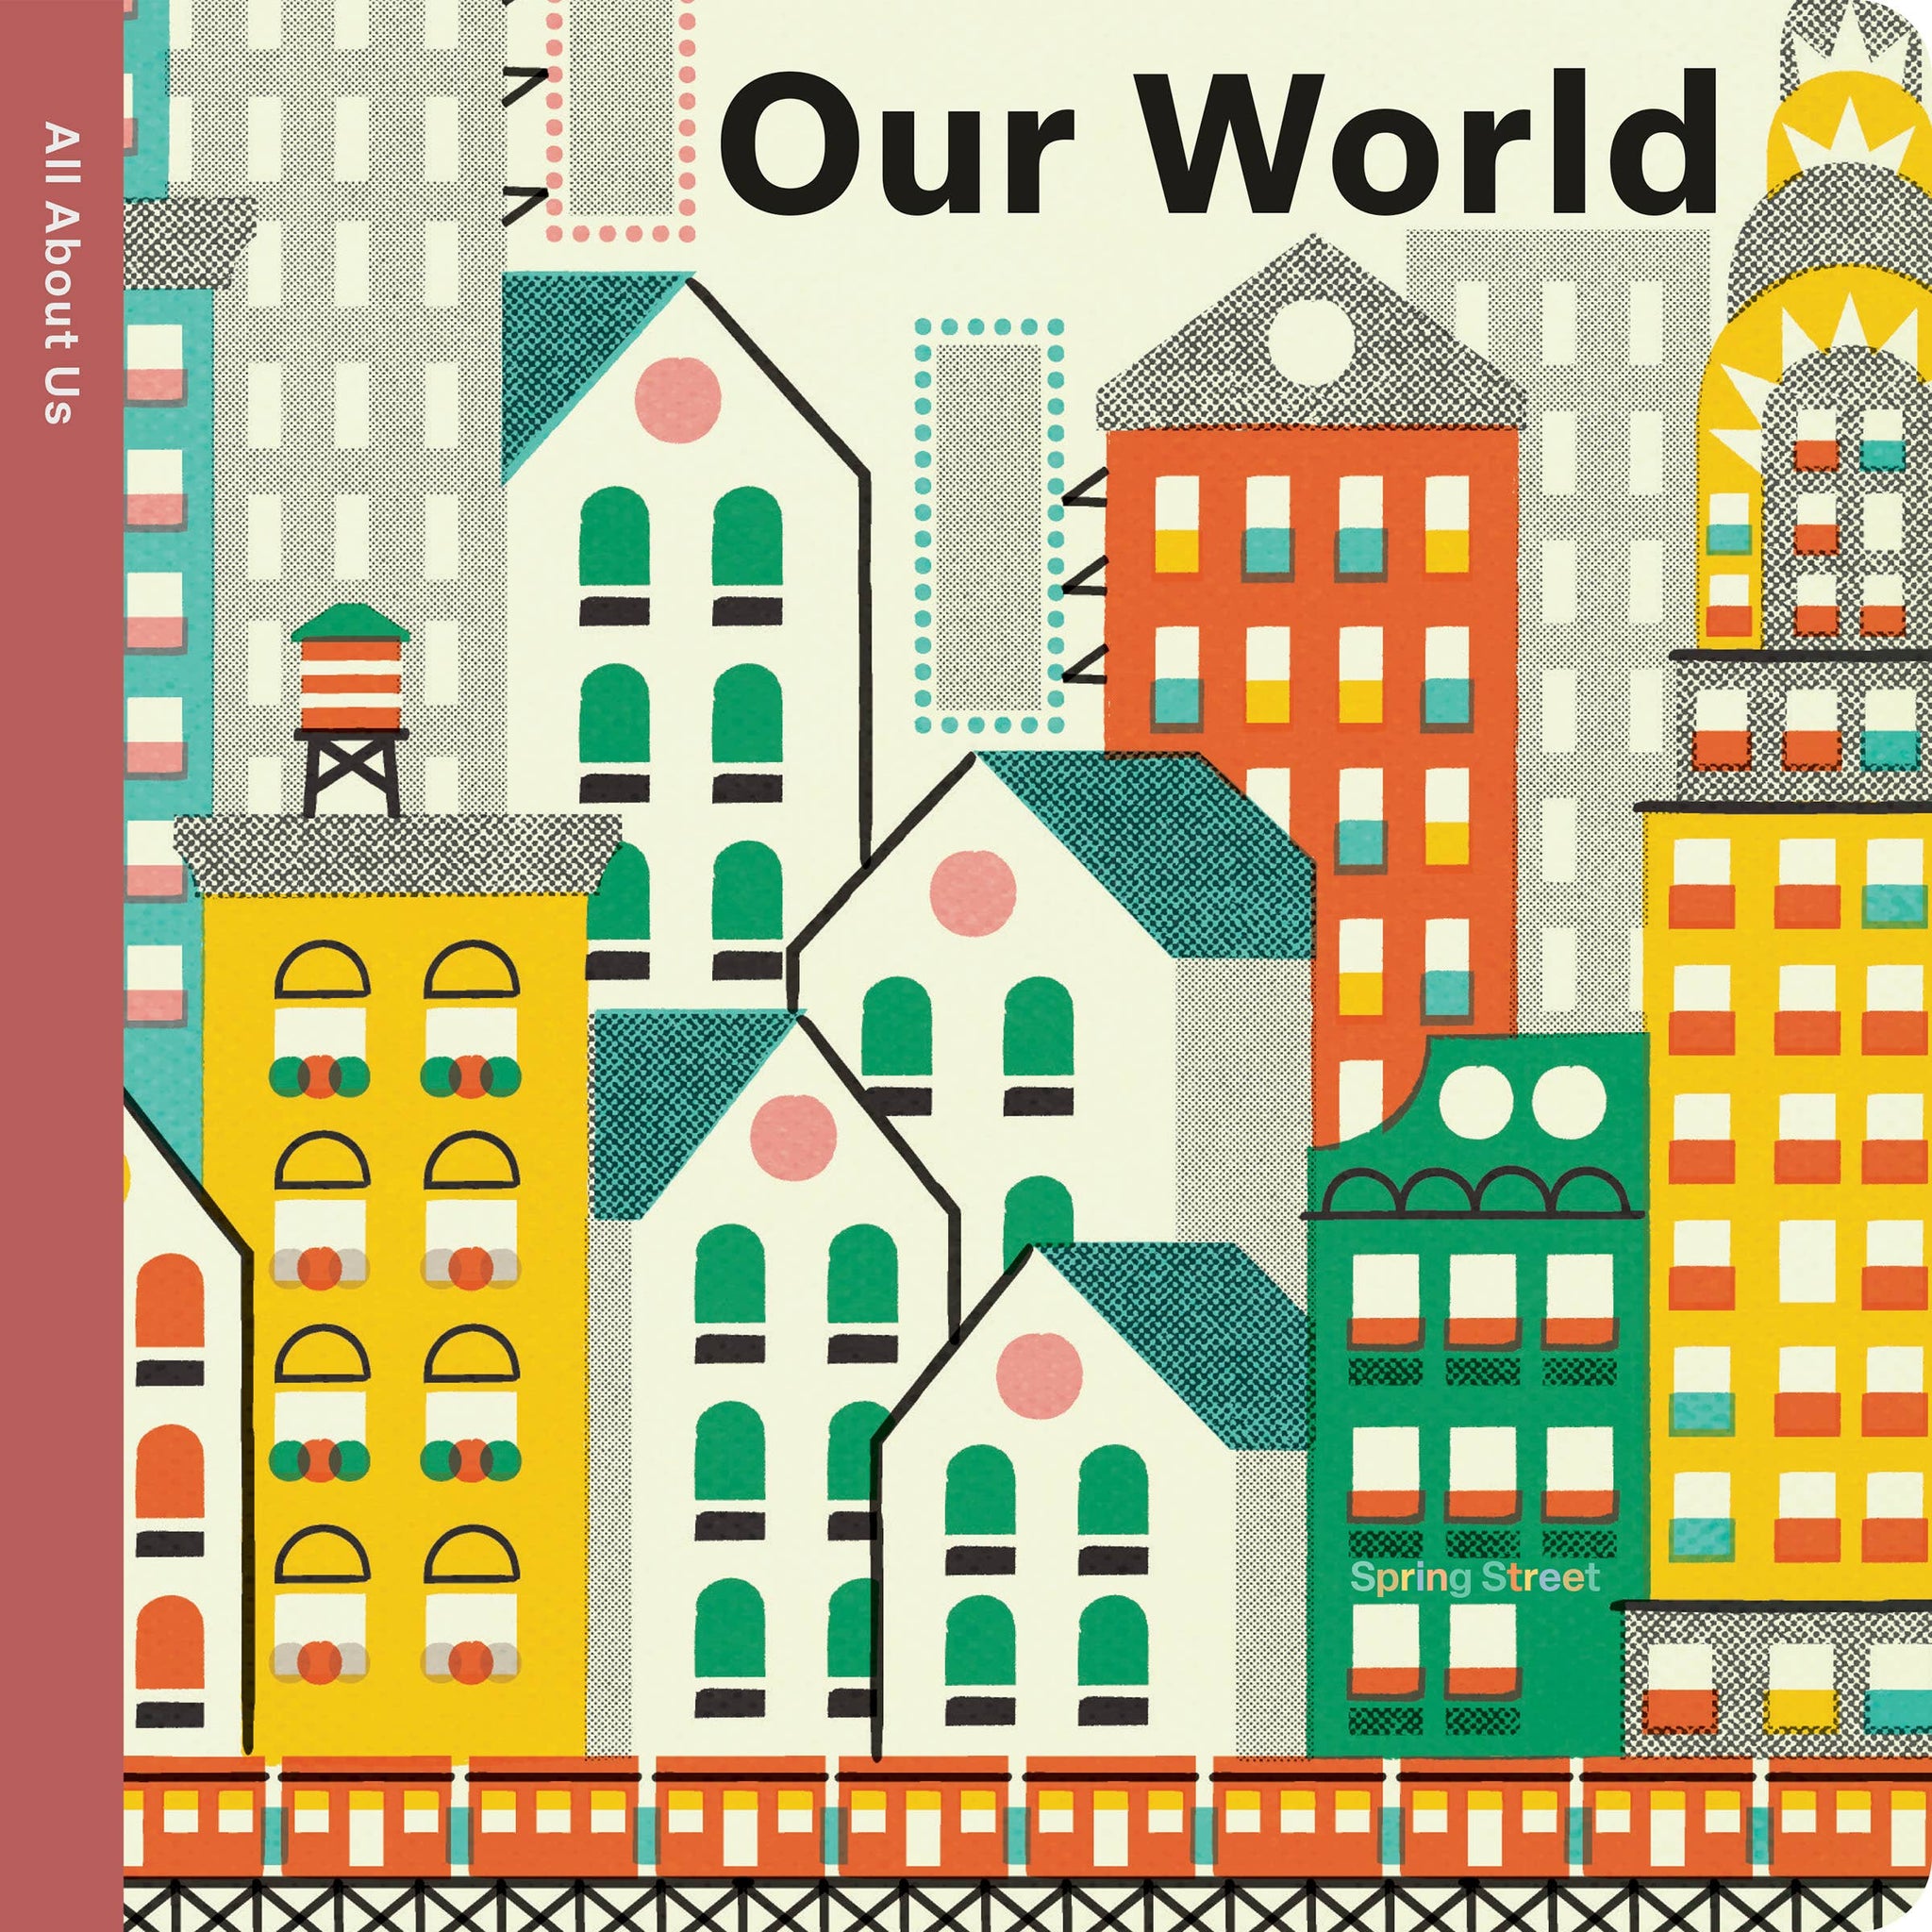 Spring Street All About Us: Our World by Boxer Books